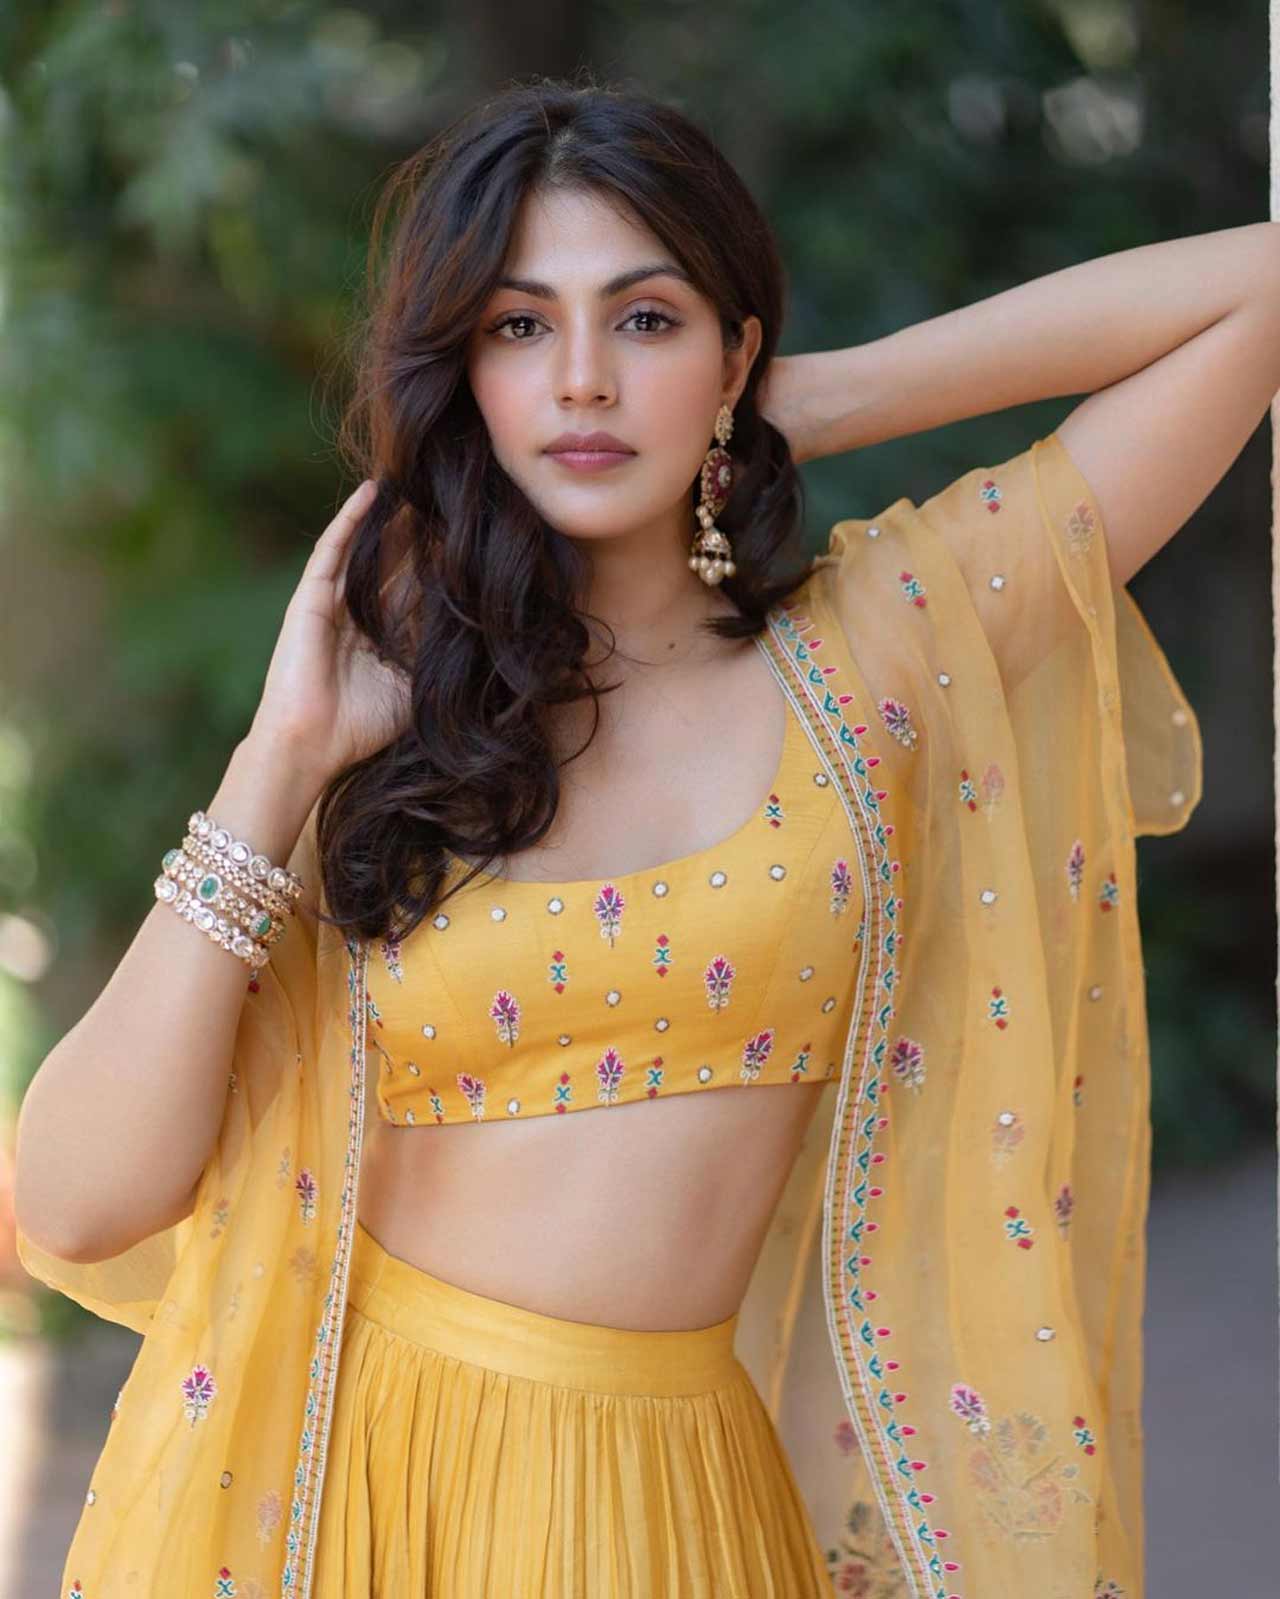 Rhea Chakraborty, who is BFF with Shibani Dandekar, also attended the actress's wedding with Farhan Akhtar, which happened in December 2021